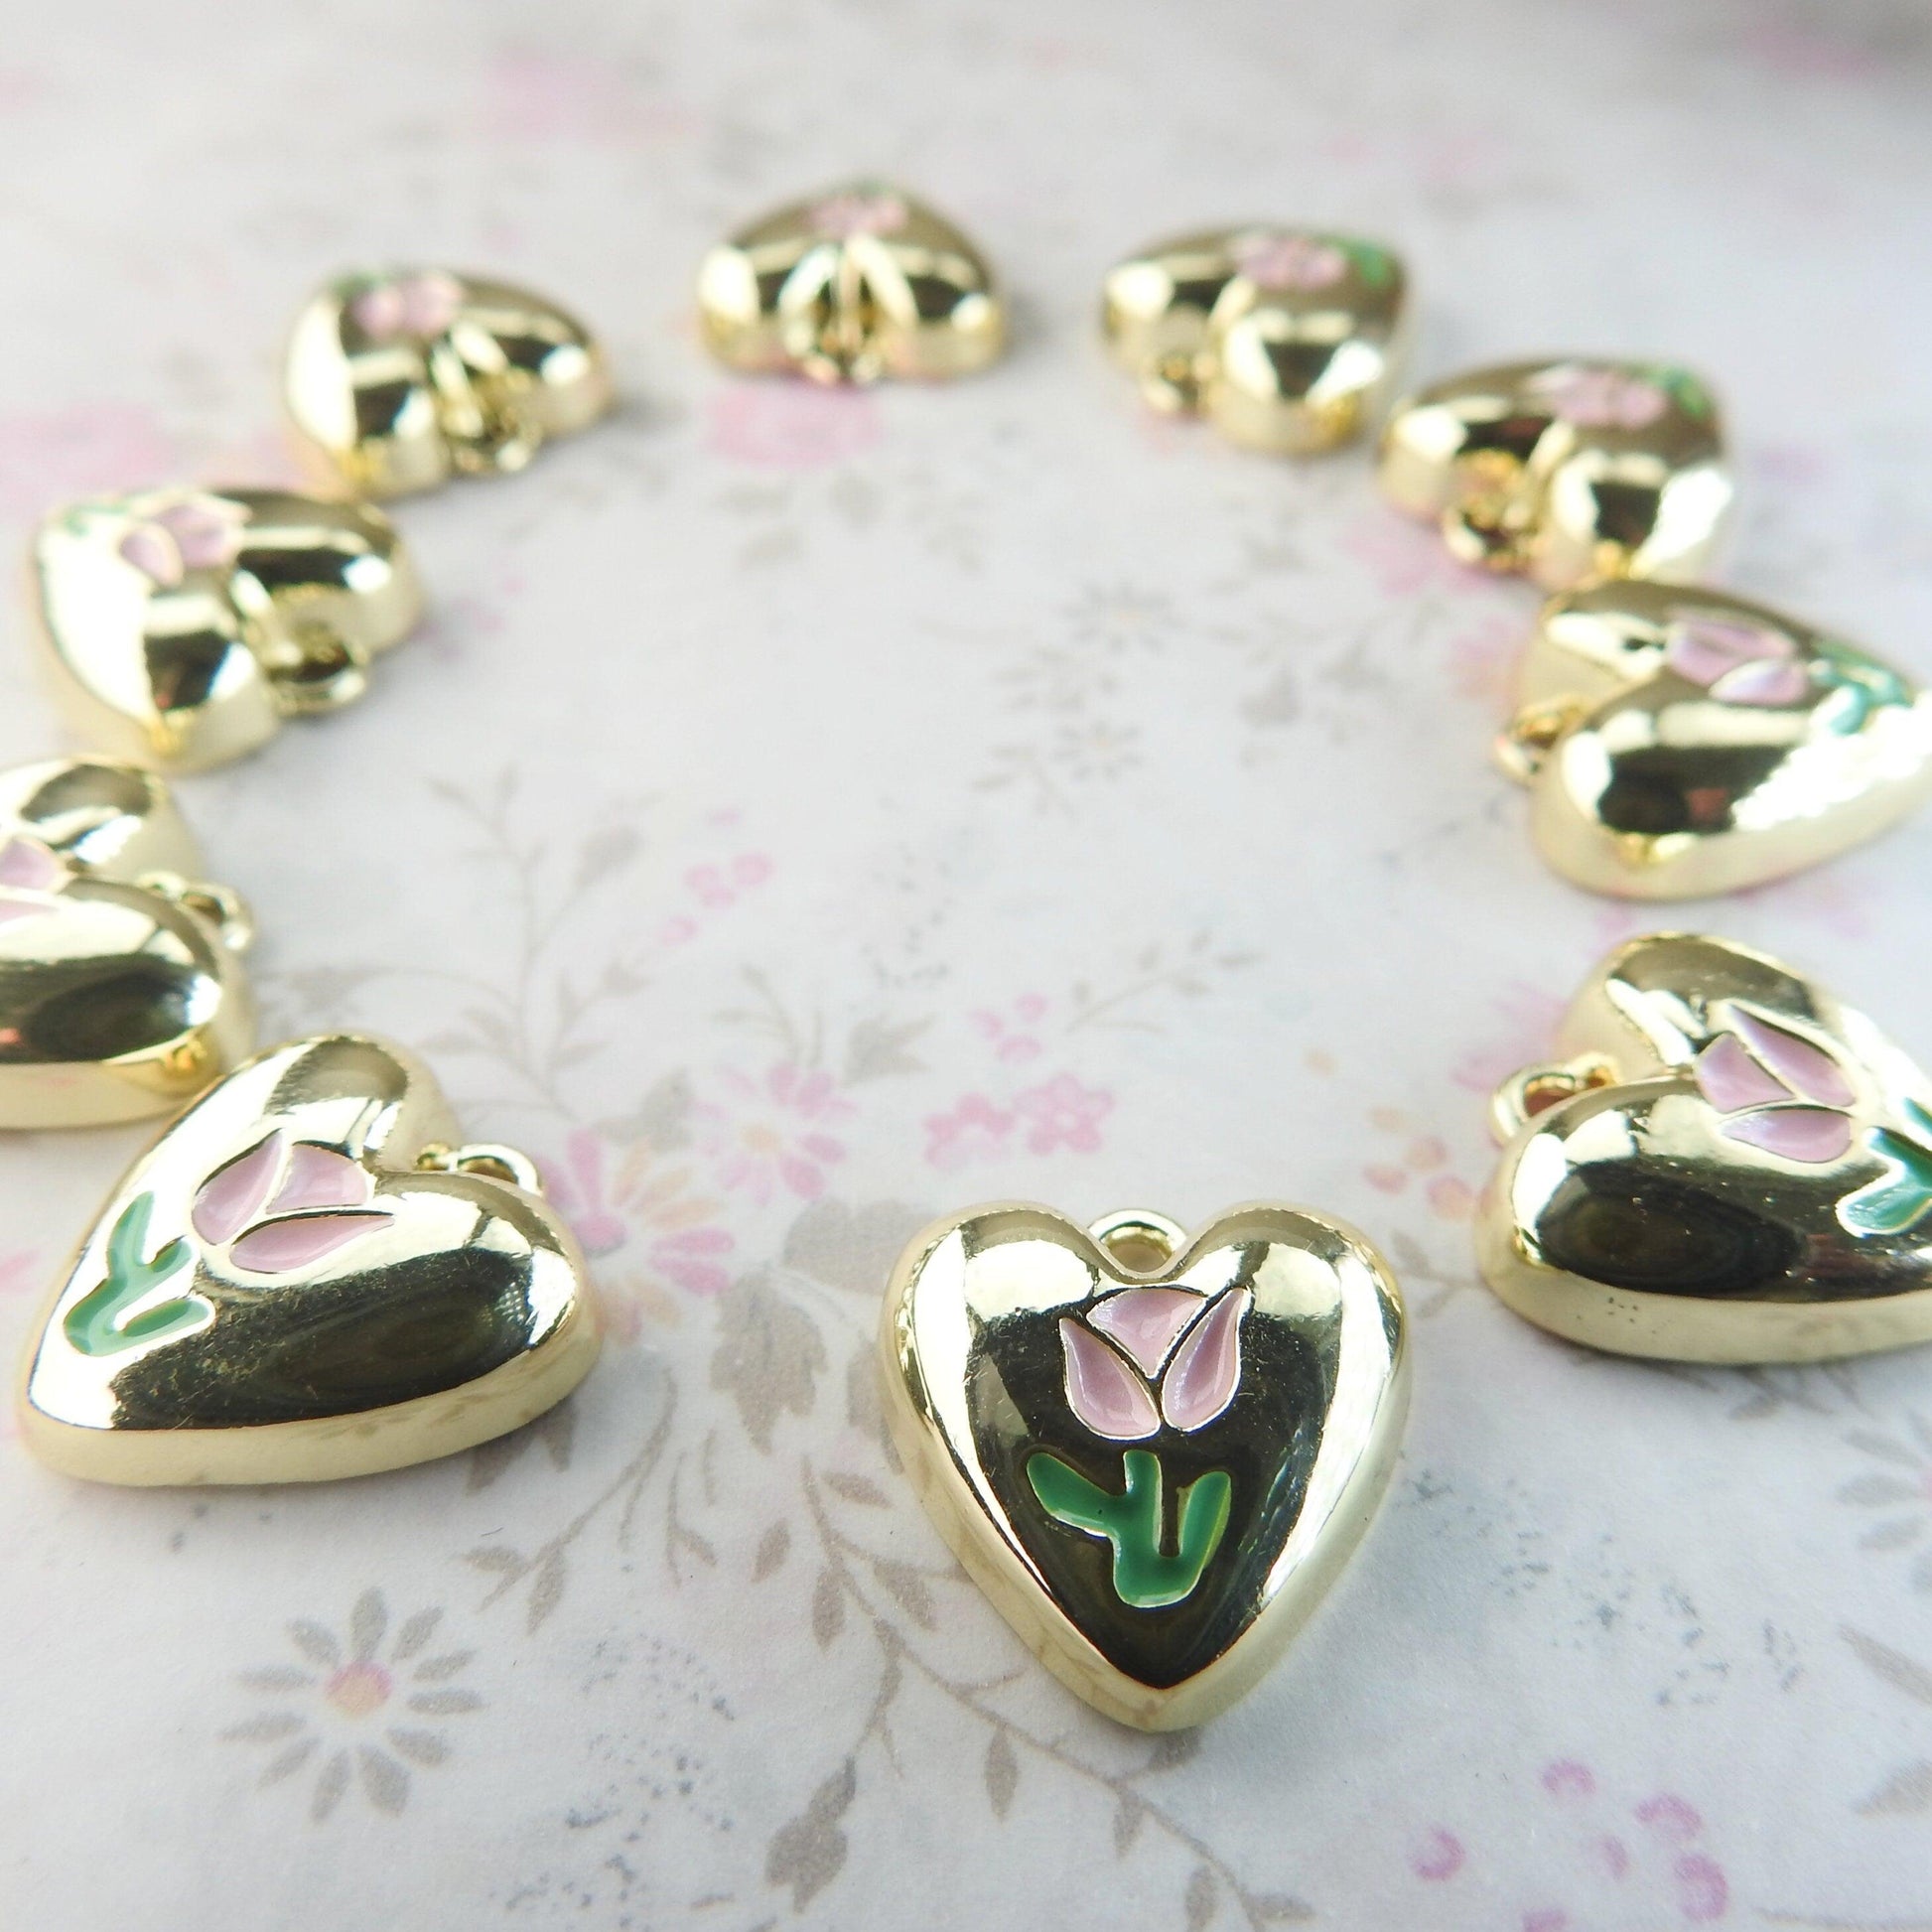 10 Heart shaped charms for bracelet, necklace, earrings, with a pink tulip flower on them. Cute jewelry-making supplies for pendants